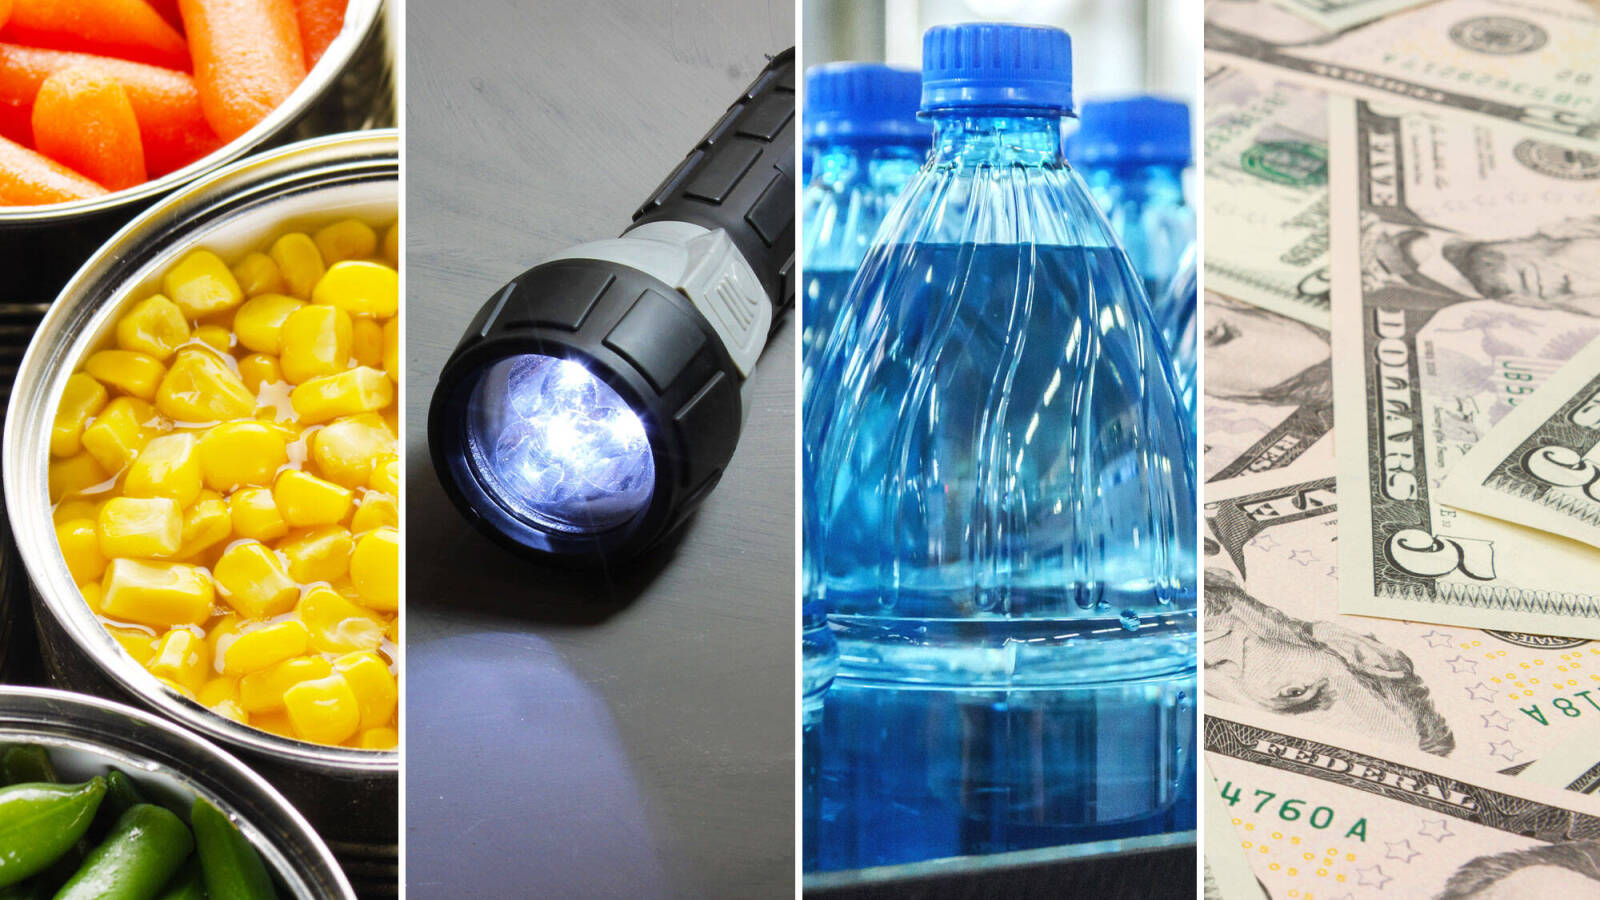 15 must-have items for your emergency survival kit